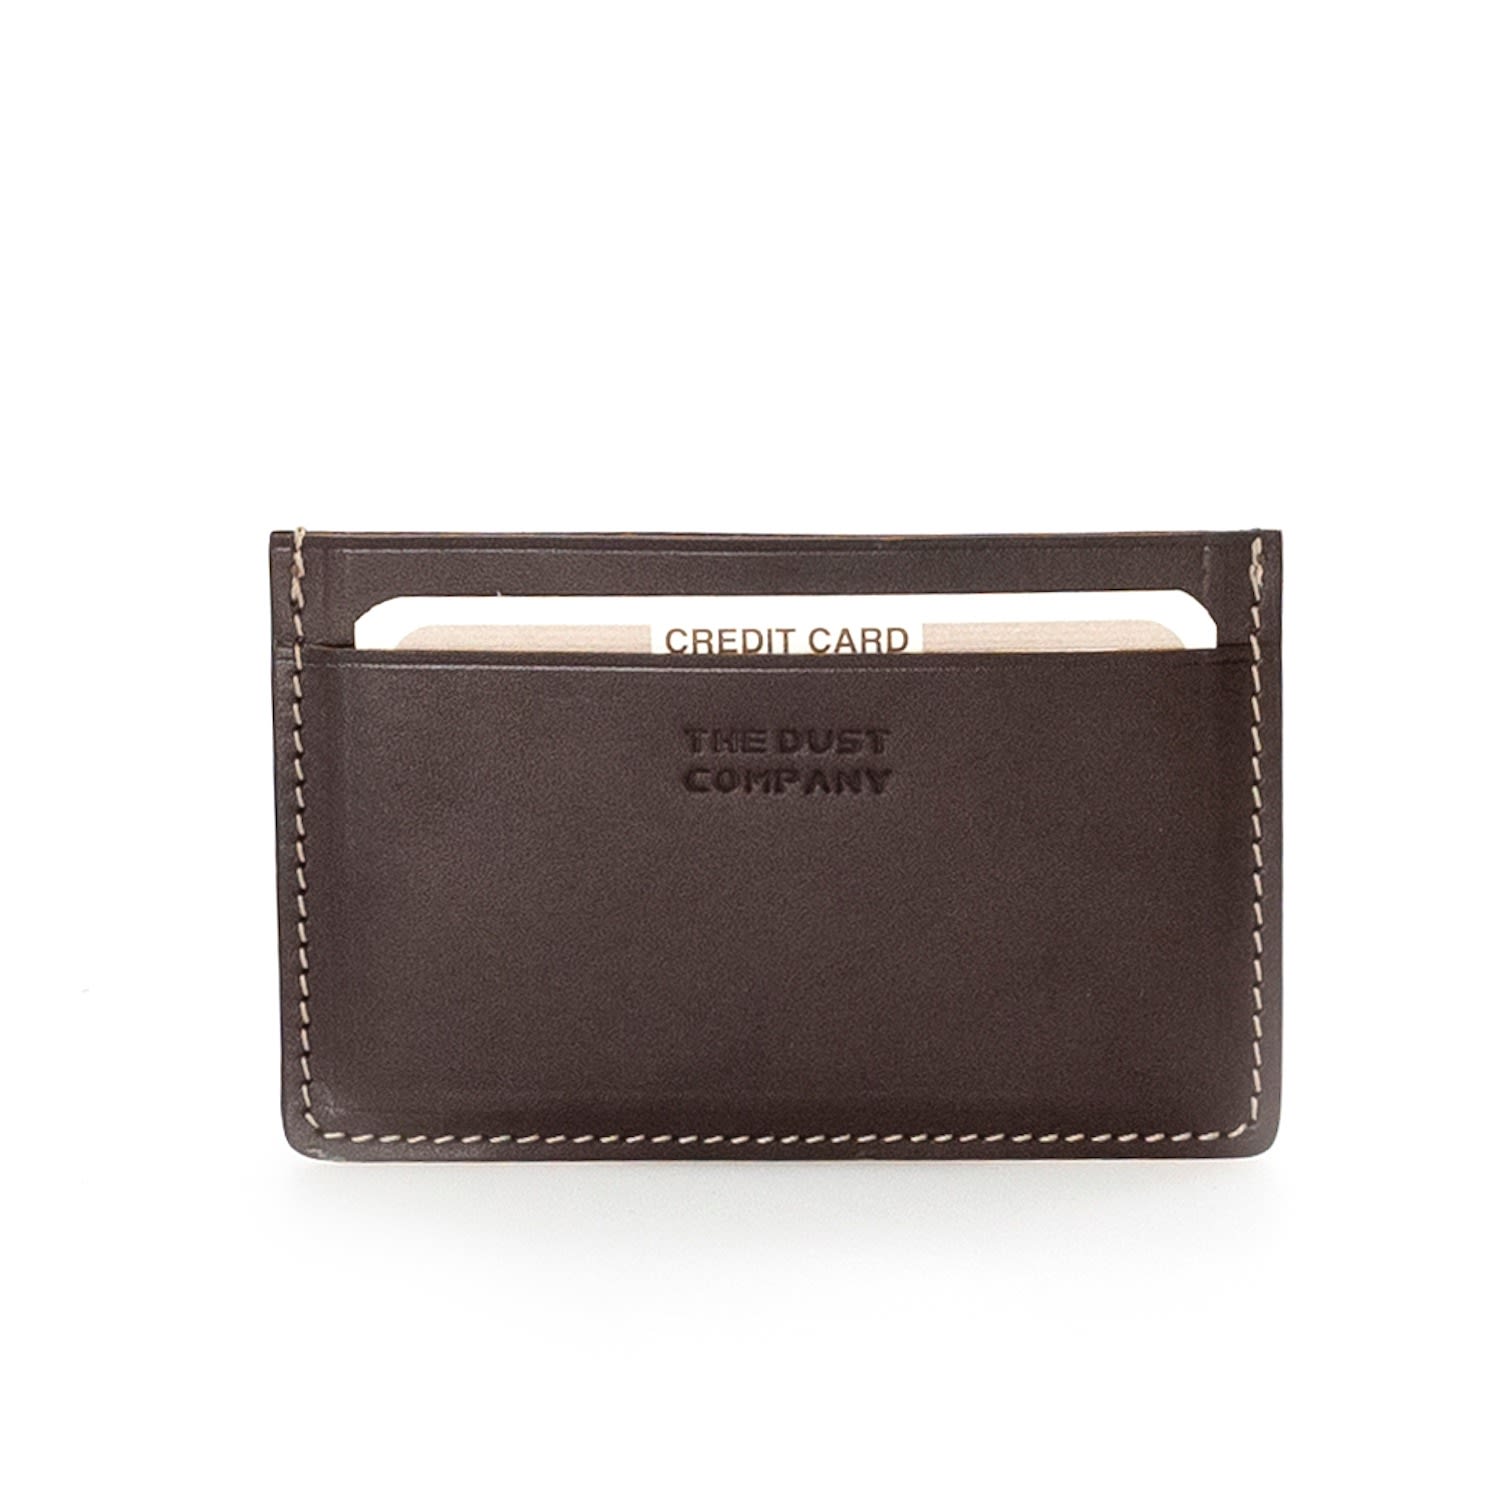 The Dust Company Men's Brown Leather Cardholders Cuoio Havana